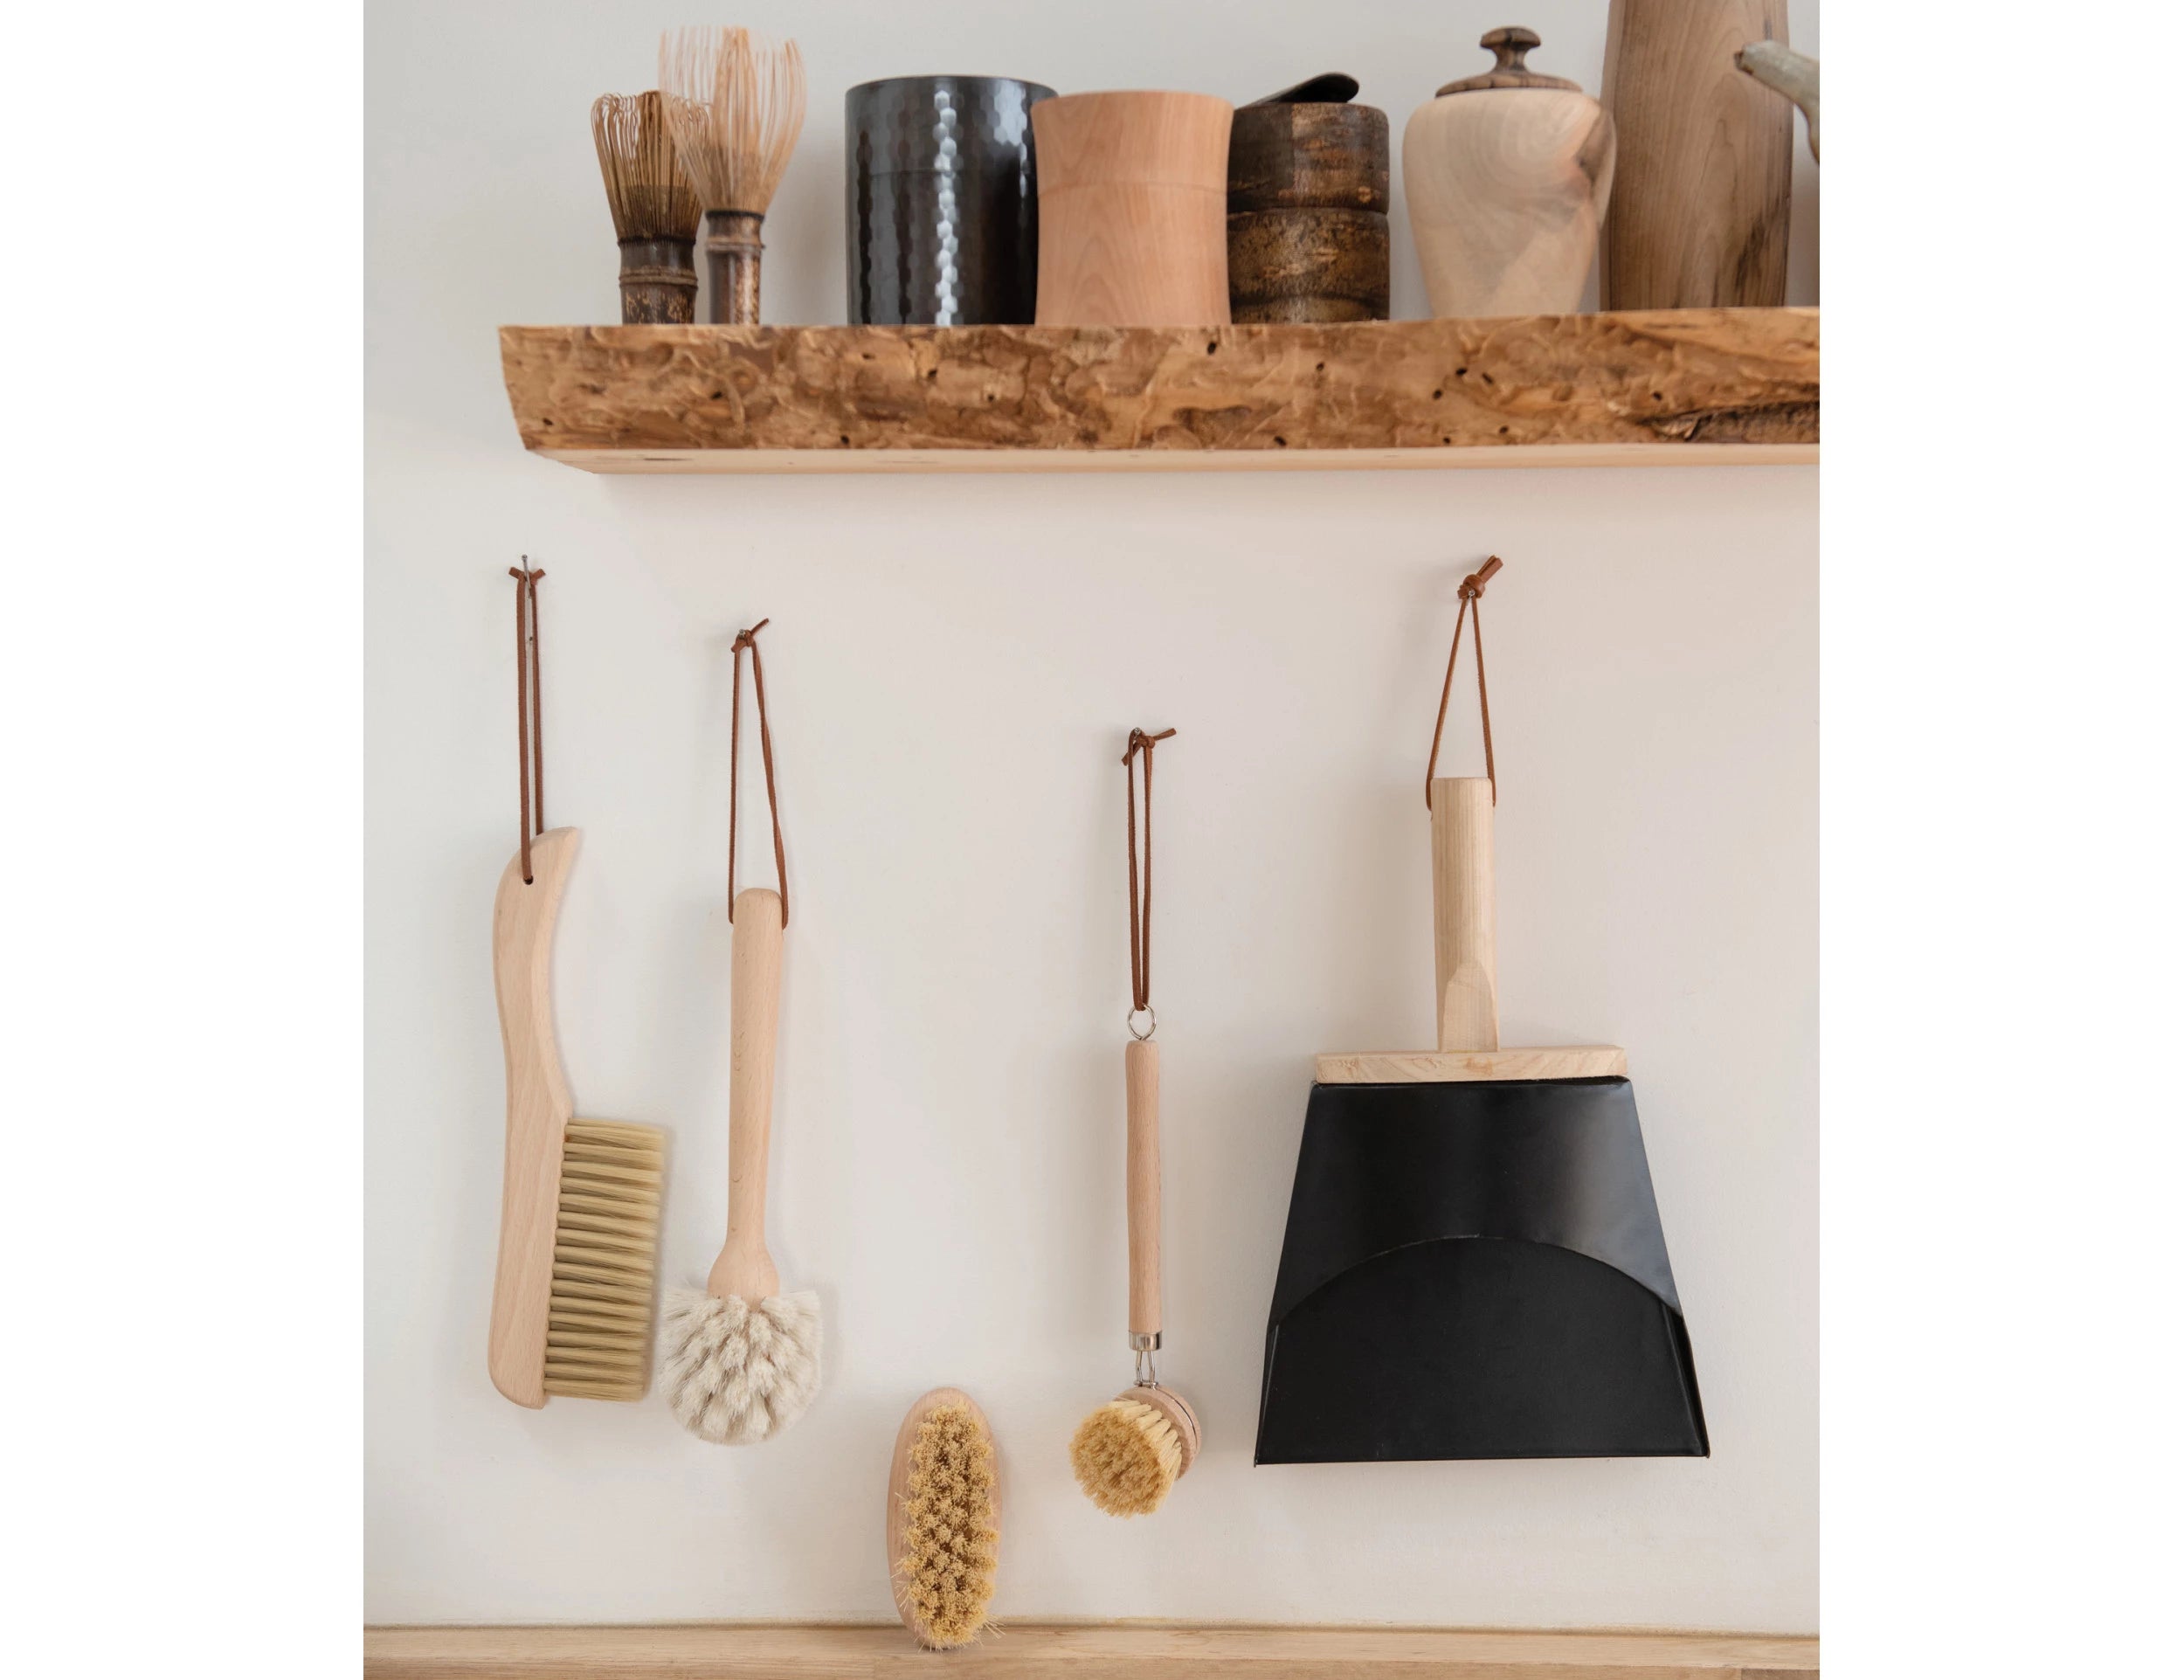 Beech Wood Flat Dish Brush with Leather Strap and silver accents hanging with dustpan and other natural cleaning brushed in neutral washing room.